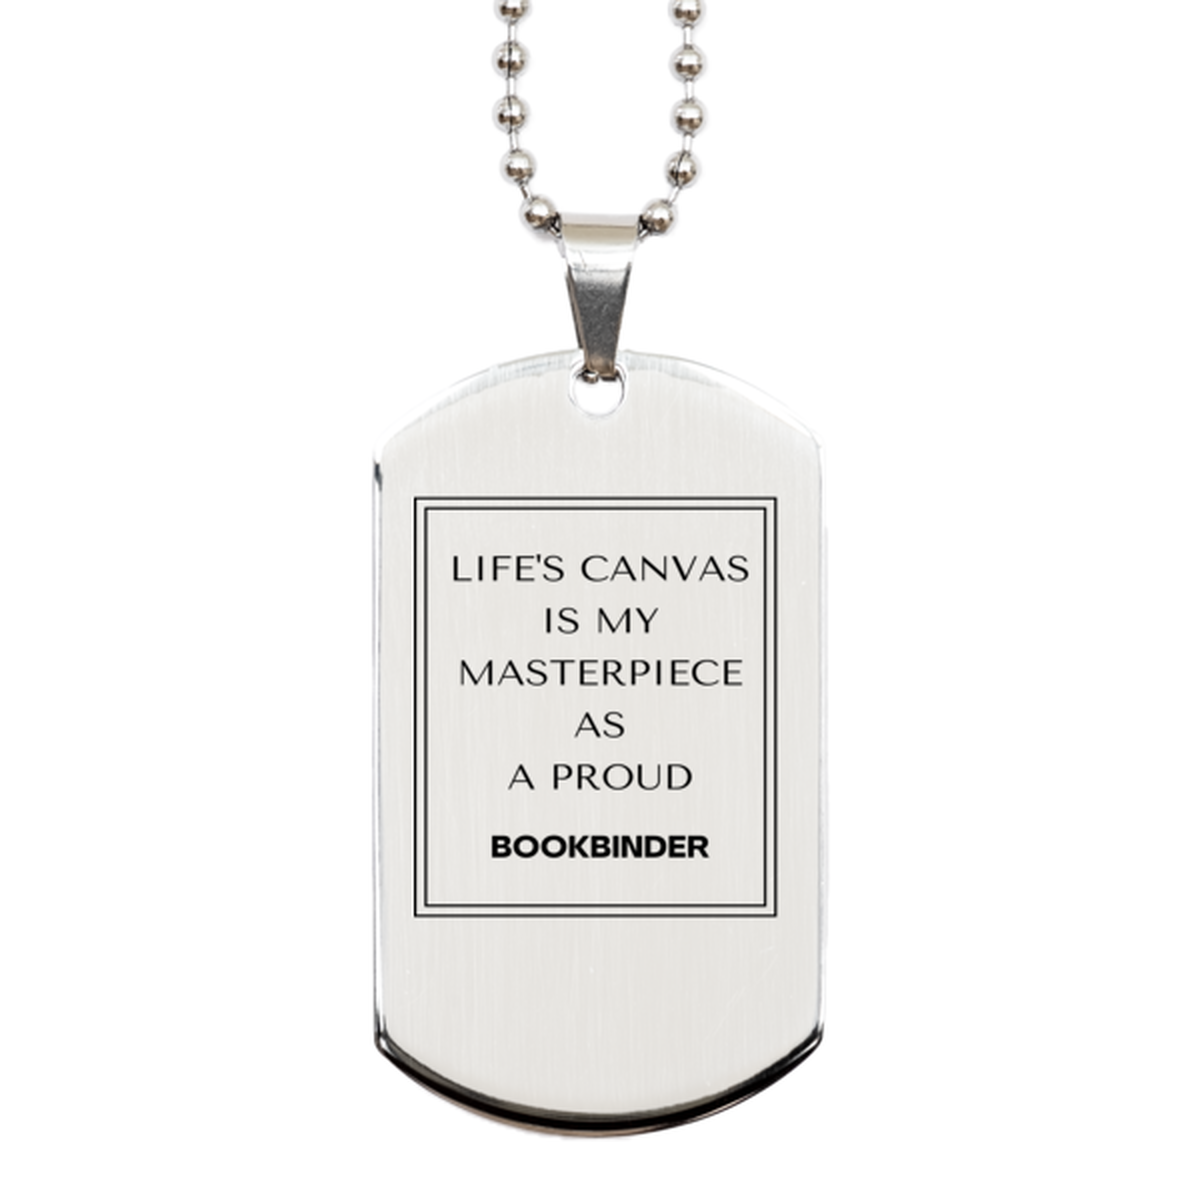 Proud Bookbinder Gifts, Life's canvas is my masterpiece, Epic Birthday Christmas Unique Silver Dog Tag For Bookbinder, Coworkers, Men, Women, Friends